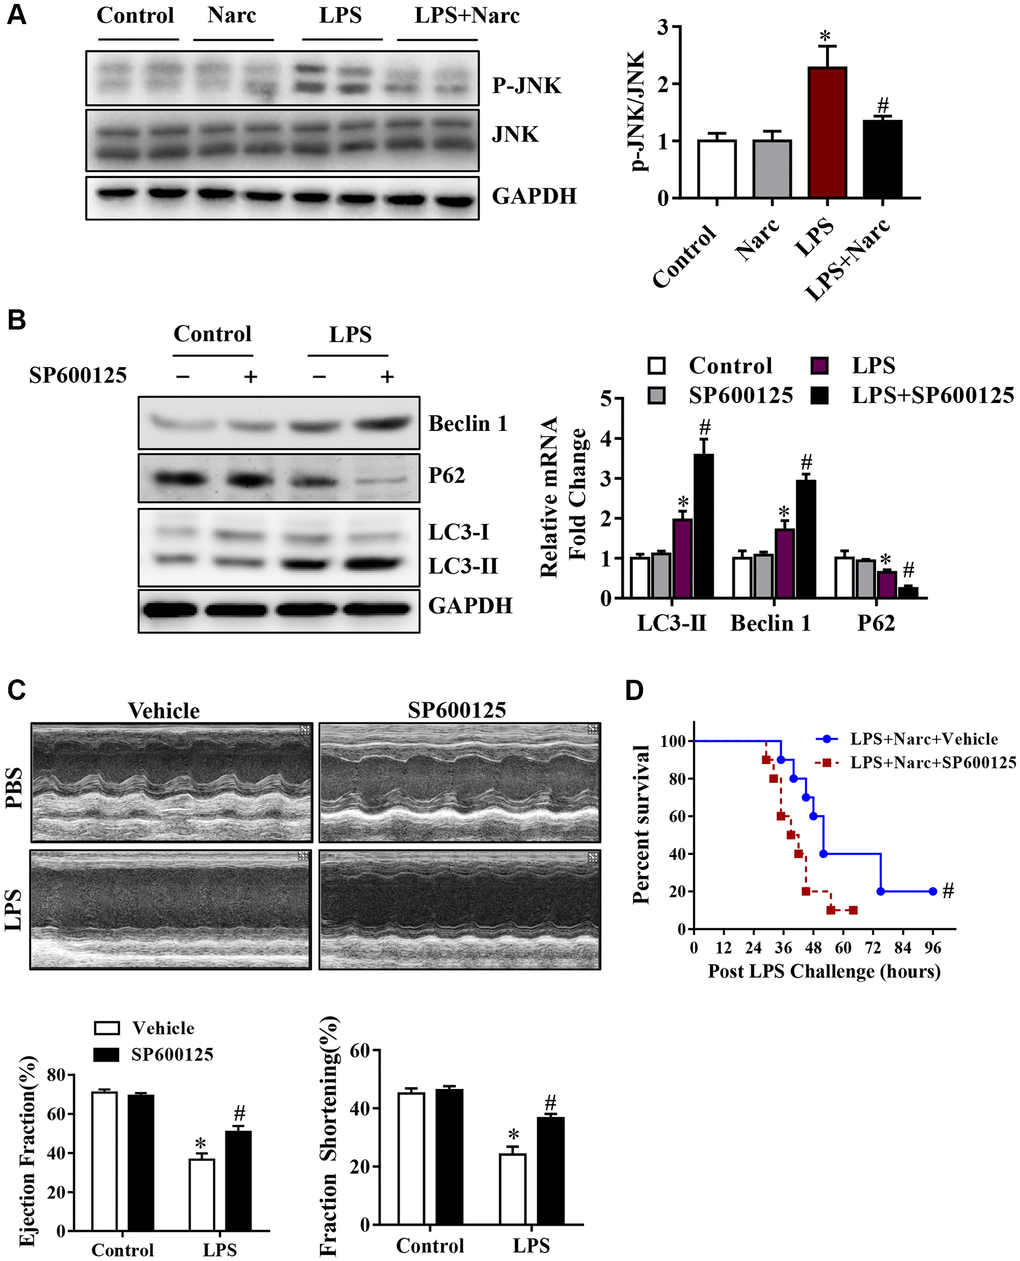 The JNK signaling pathway is responsible for narciclasine-mediated protection against sepsis-induced myocardial injury. (A) The expression levels of total JNK and phosphorylated JNK (p-JNK) were measured by western blotting. Mice were treated with SP600125, an inhibitor of JNK activity, prior to LPS stimulation to further investigate the role of JNK in autophagy. (B) The levels of autophagy-associated proteins, p-JNK and JNK were assessed by western blotting. (C) The LVEF and LVFS of mouse hearts after LPS challenge for 96 h were measured by echocardiography. (D) The survival rates of LPS-injected mice throughout the 96-h study period. n = 3–8 per group. The data are shown as the means ± SEM. *P #P 